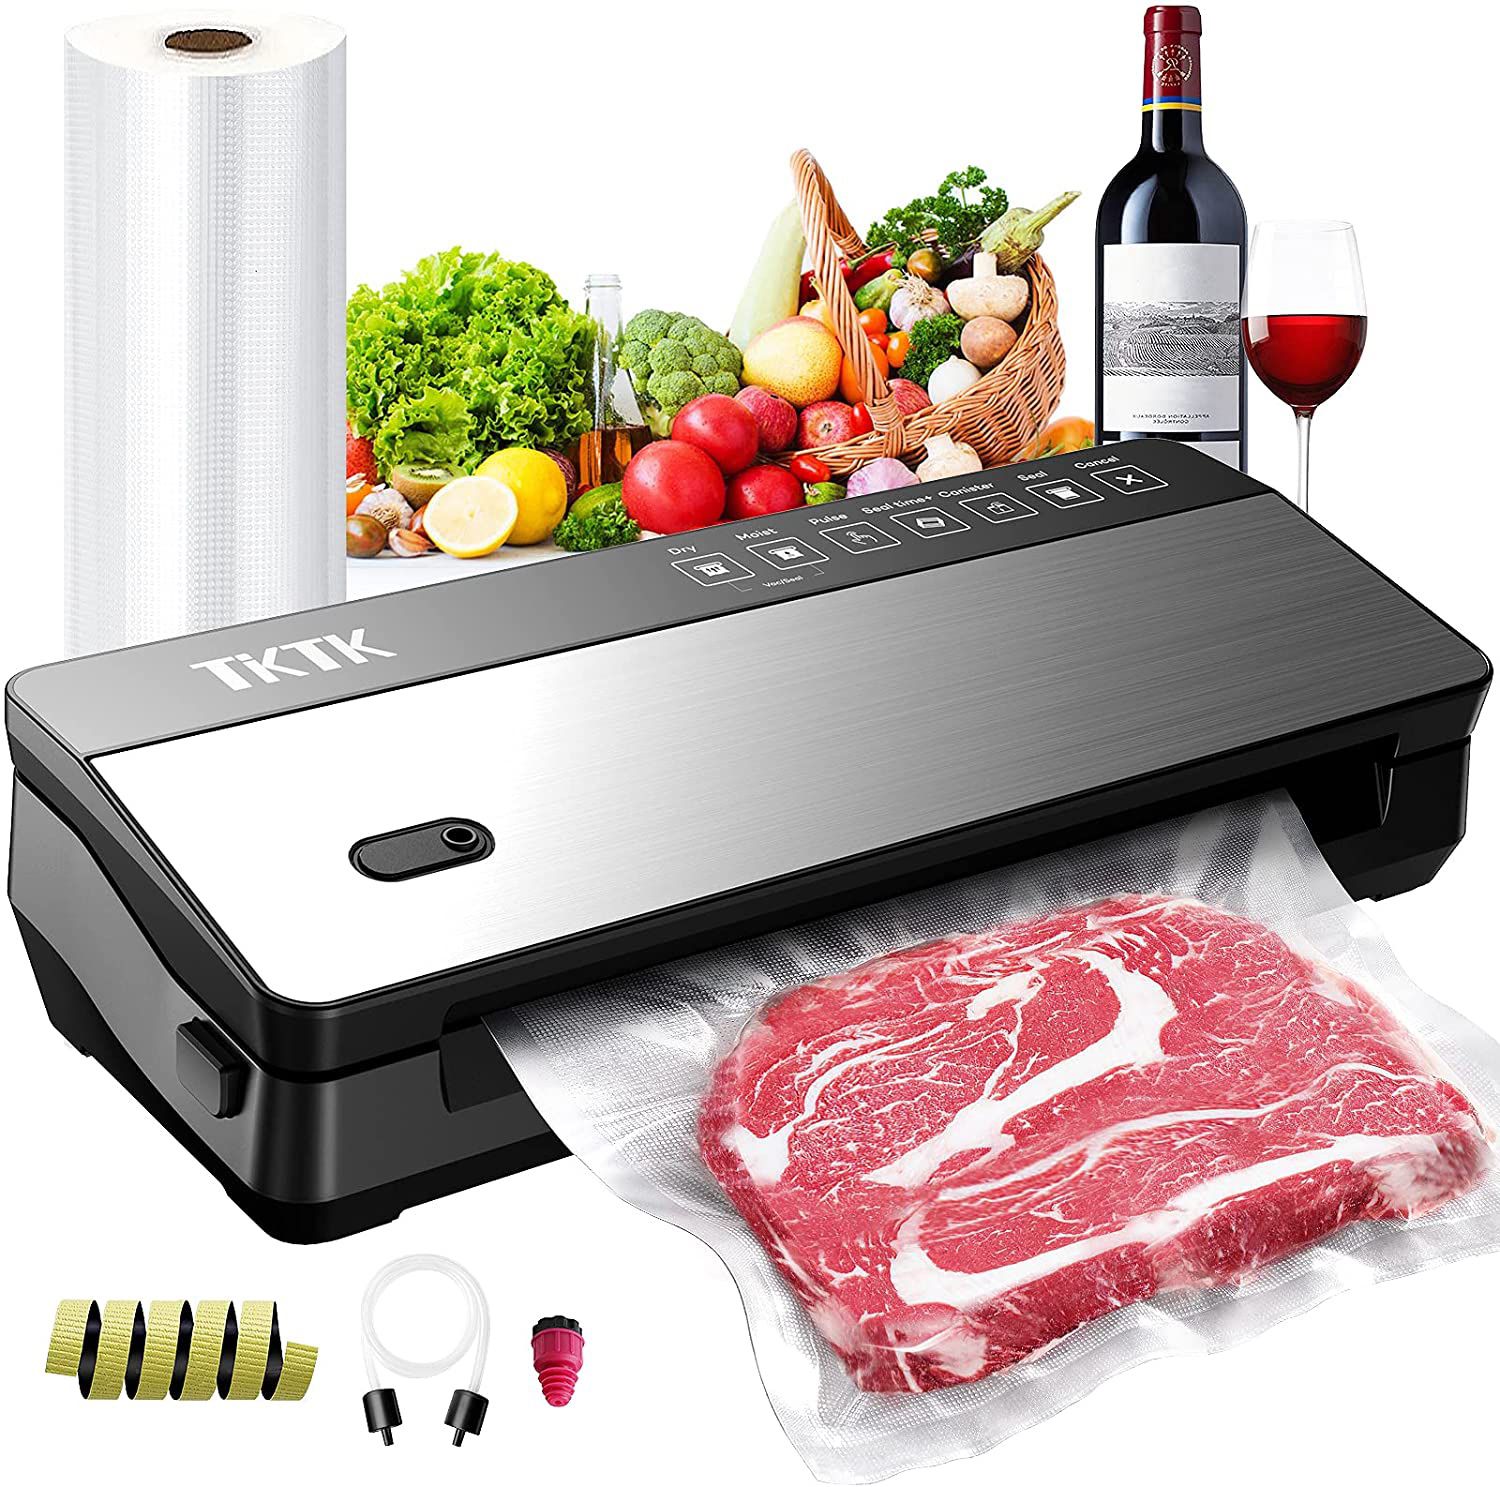 Vacuum Sealer Machine,TKTK 7 In 1 Food Sealer,Powerful Air Sealing System Machine,85 Kpa,Dry&Moist Modes,with Built-in Cutter, Paper Bag Storage,Gifts